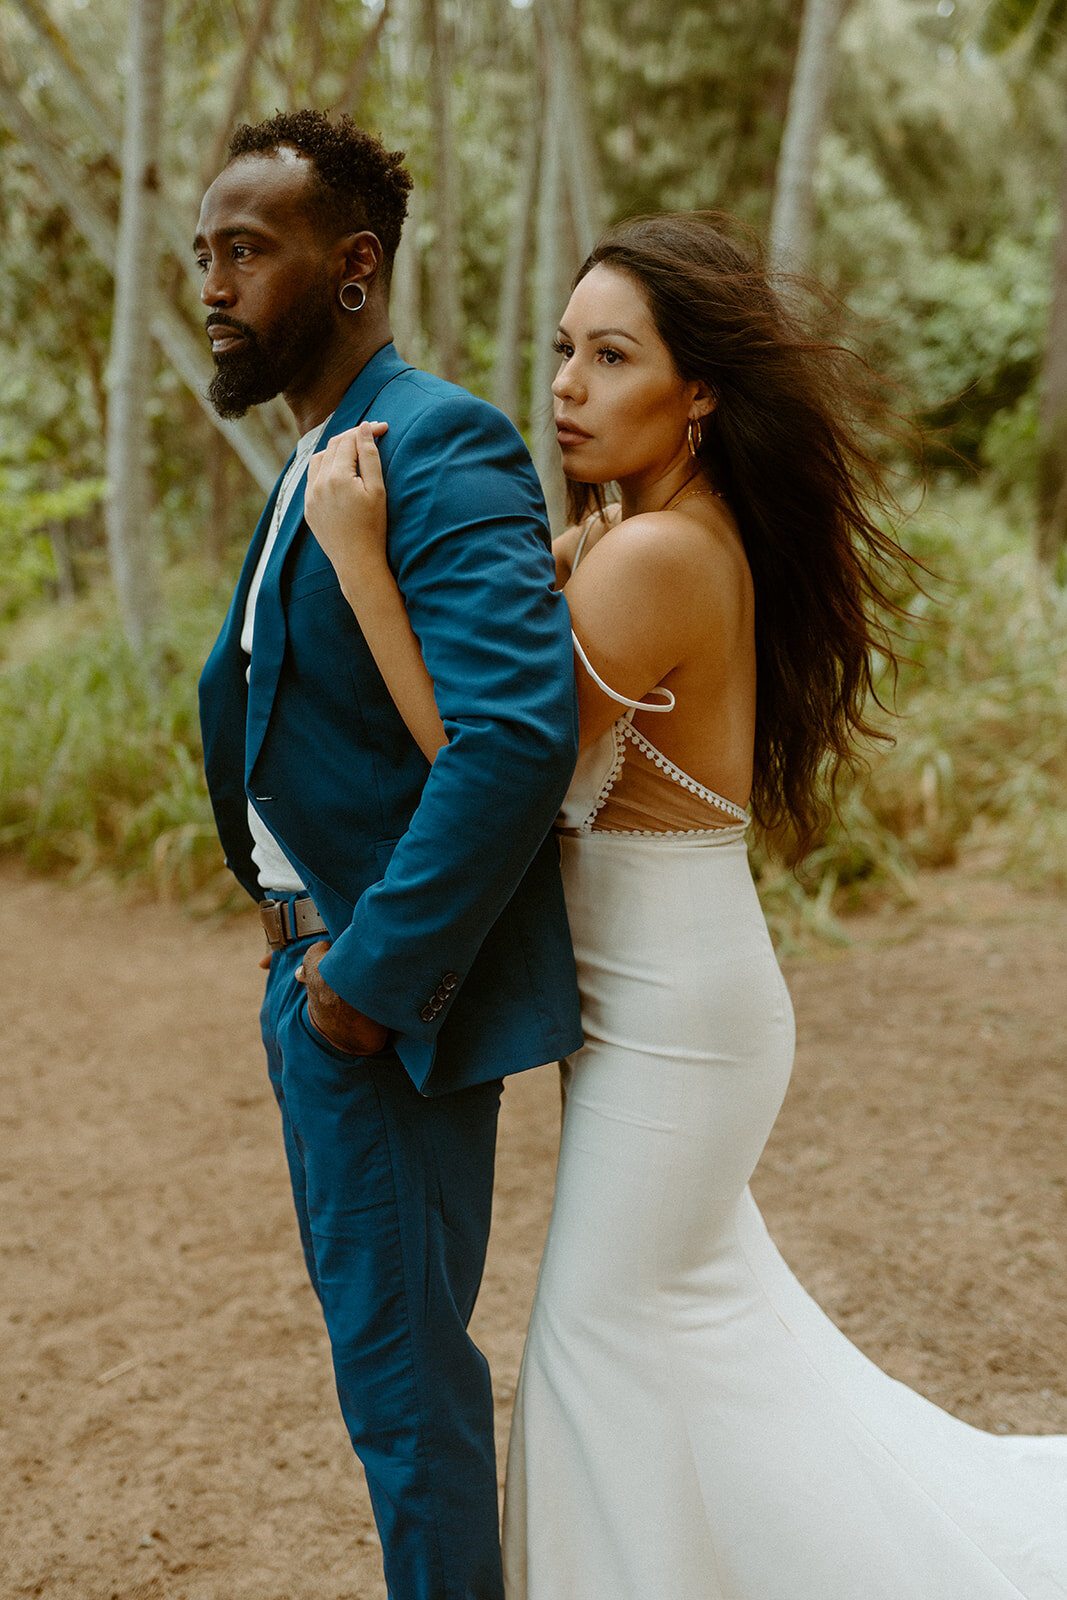 5hawaii elopement photography emilee setting photo oahu elopement packages